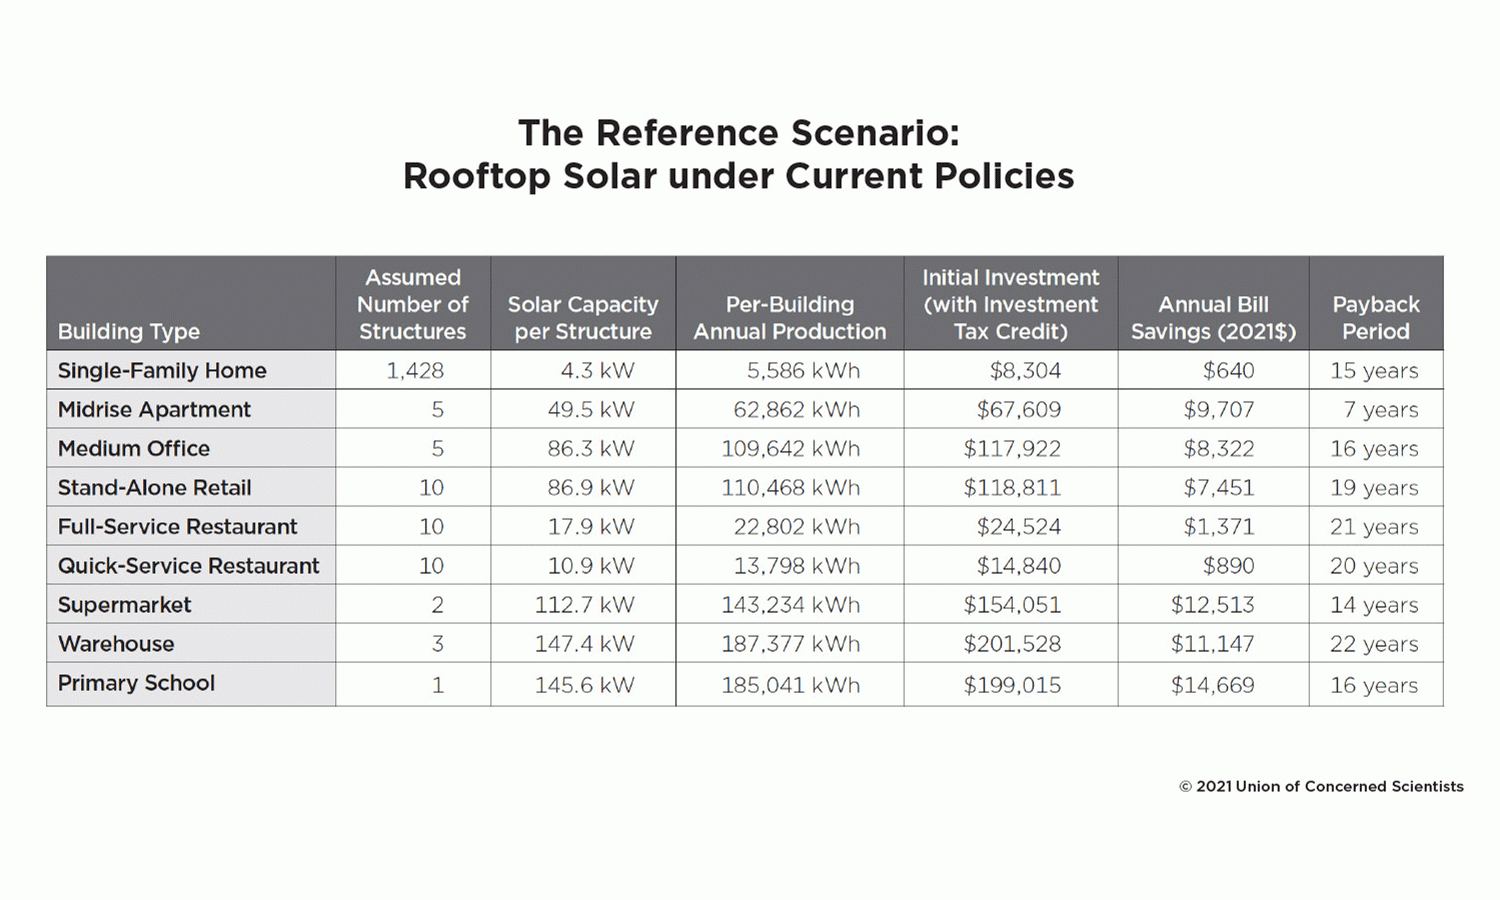 Rooftop Solar under Current Policies Table